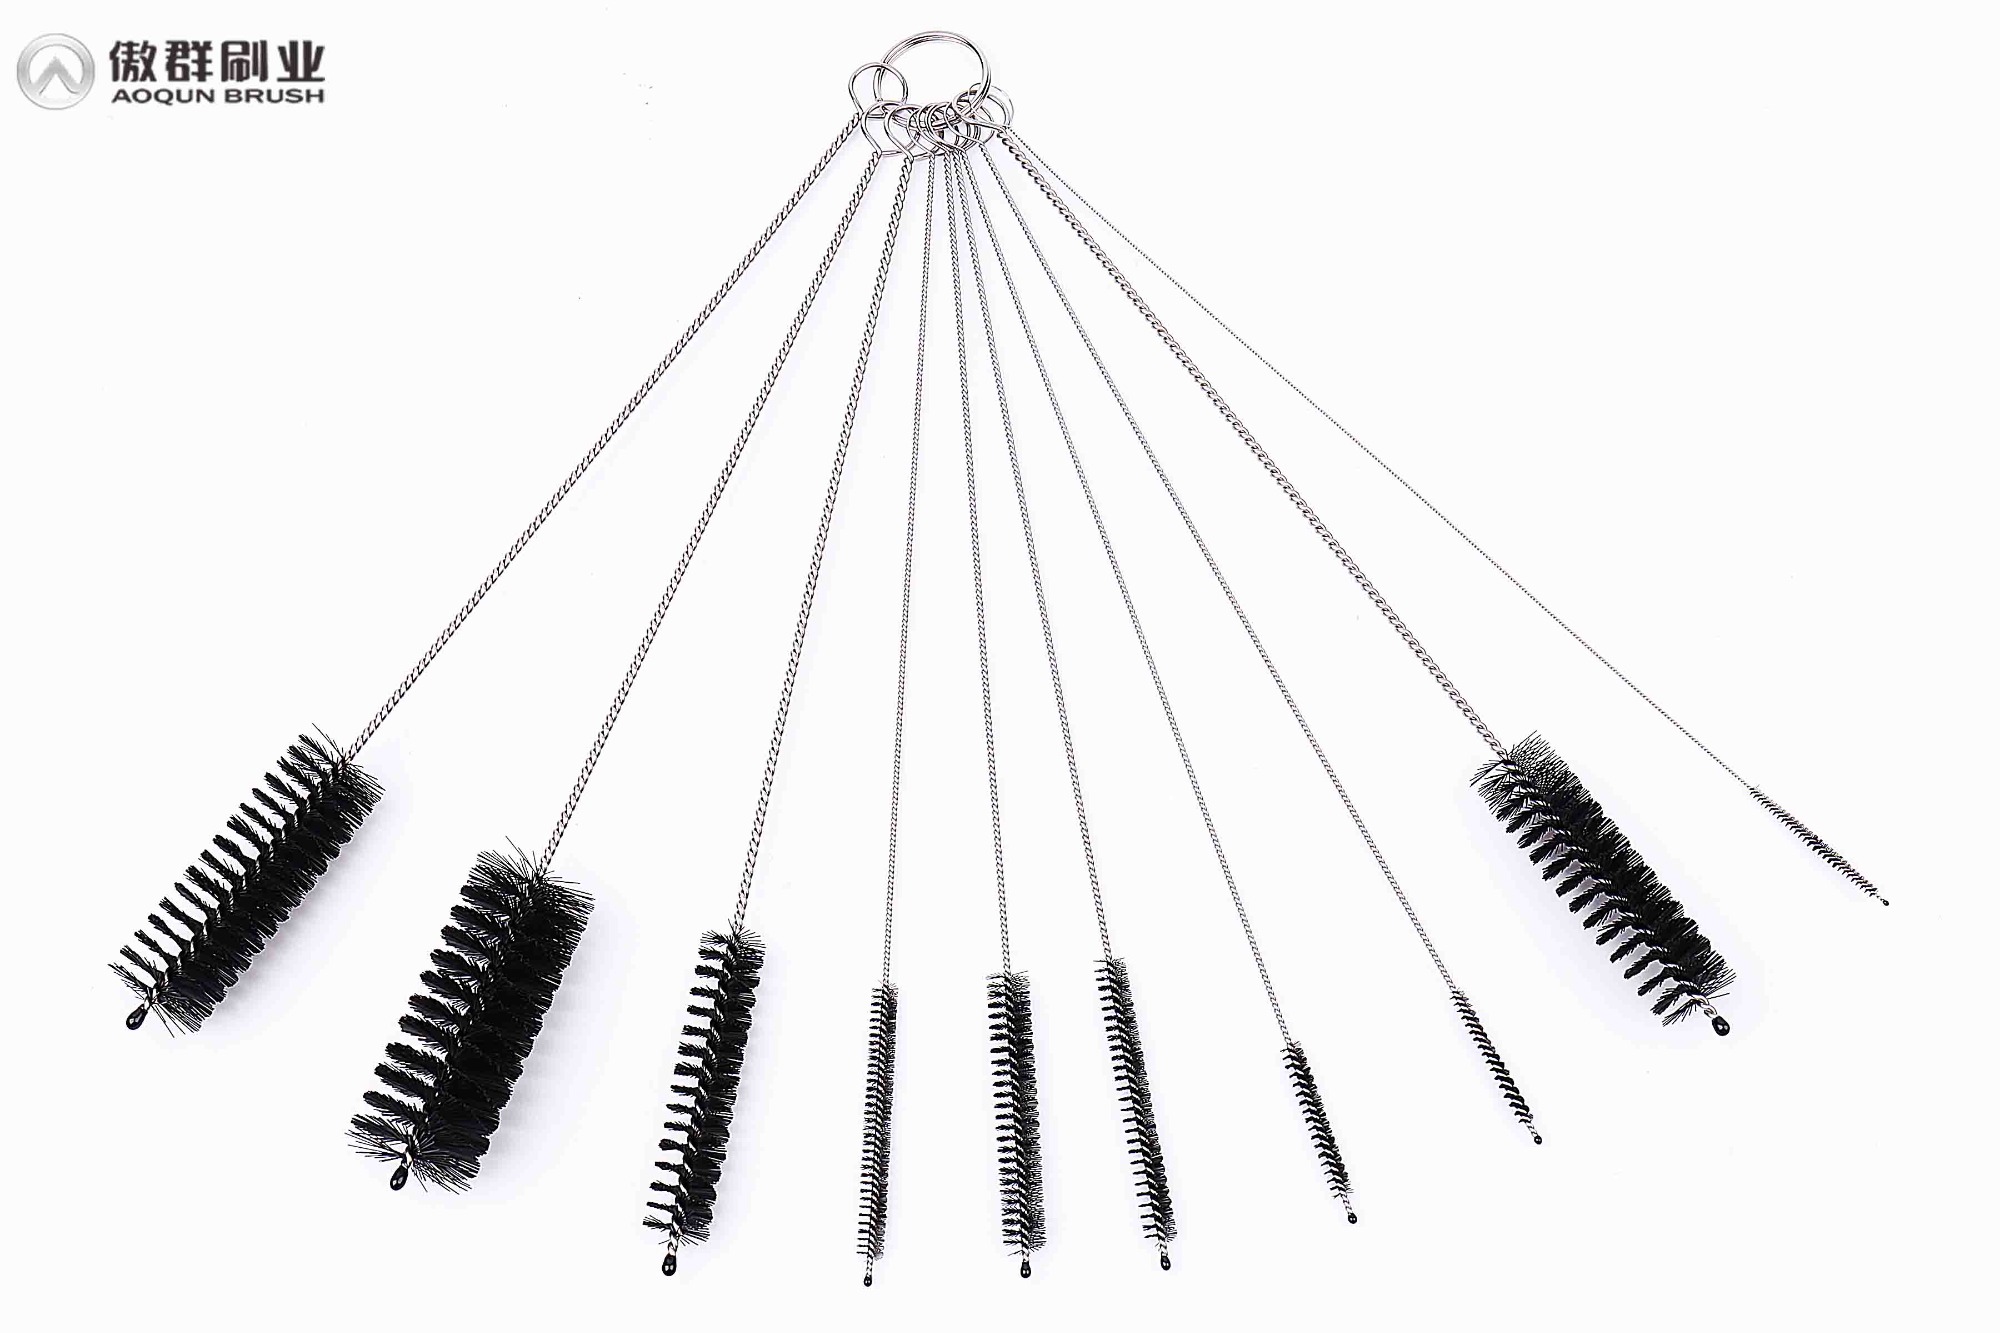 What Are The Characteristics Of The Pipe Cleaning Brush?